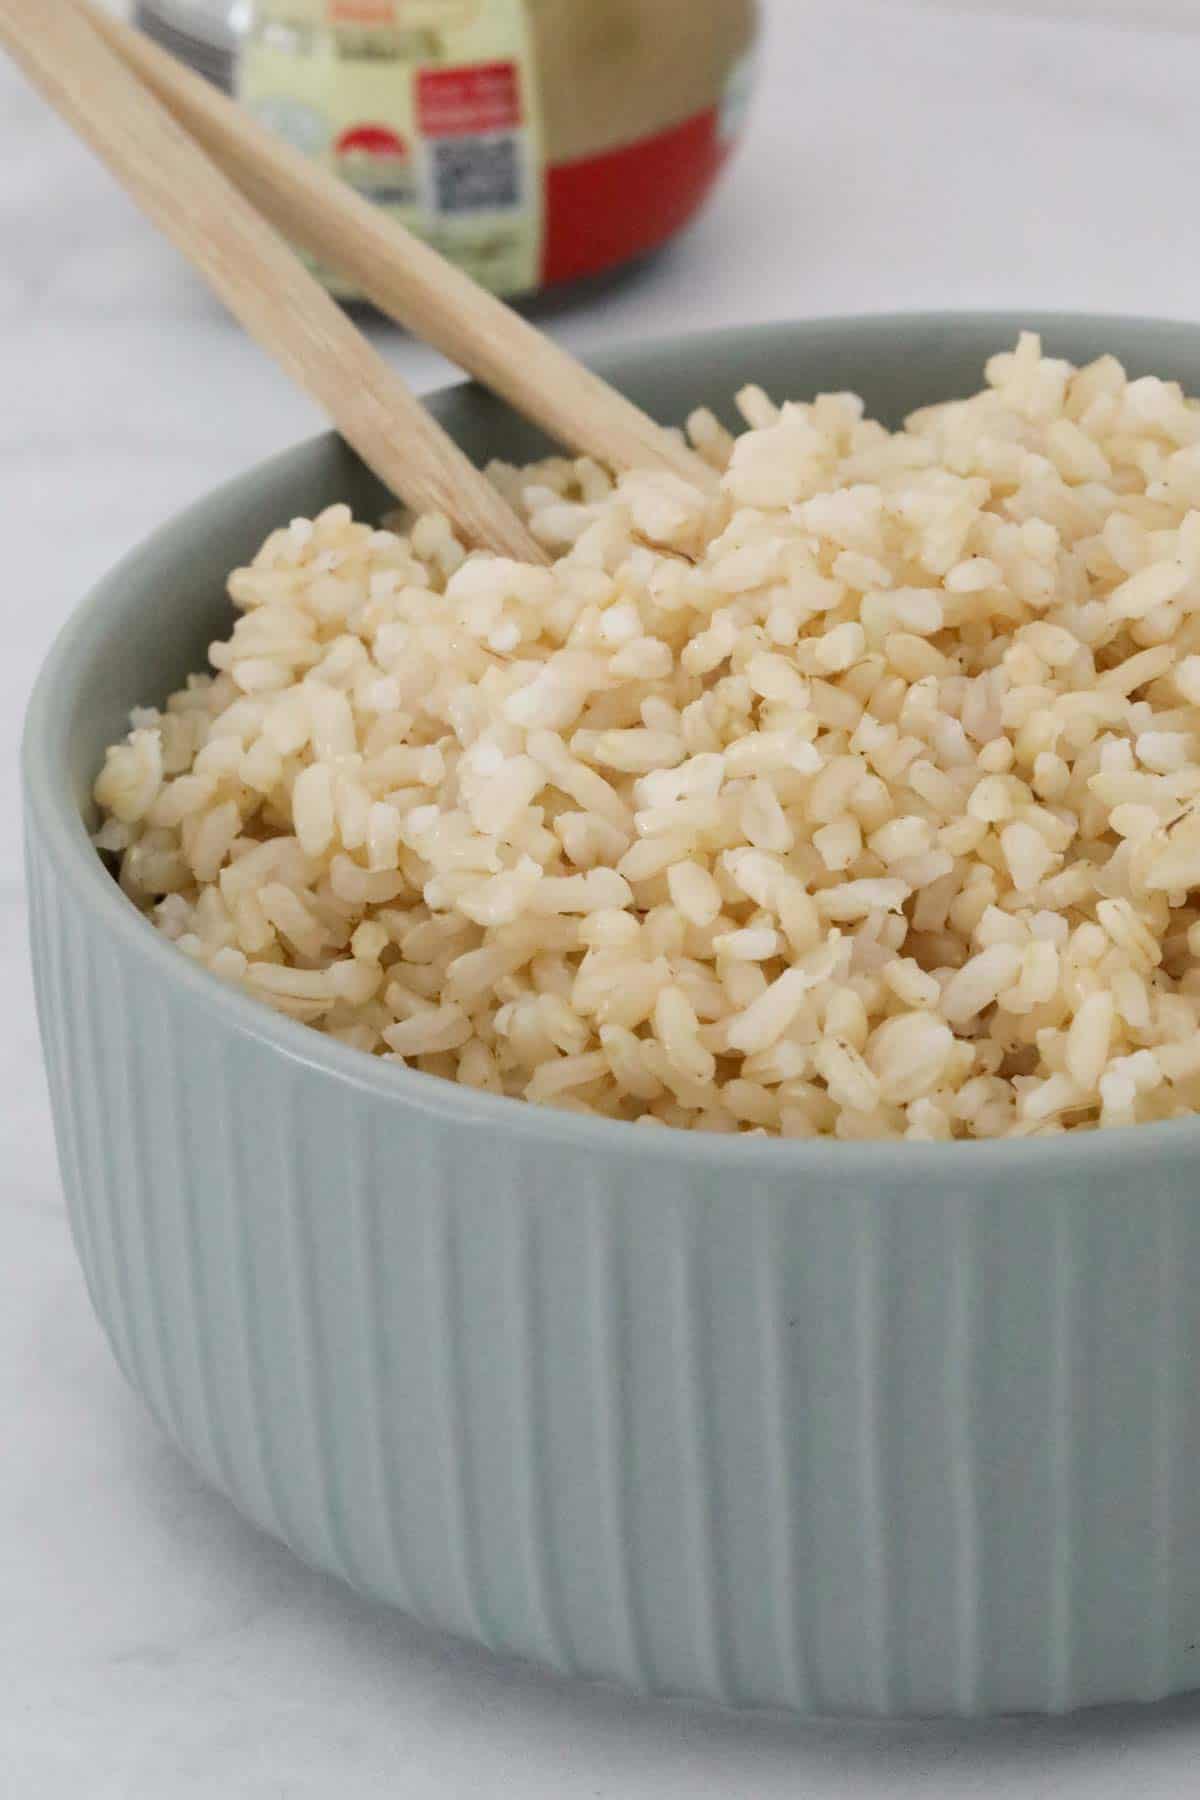 Chopsticks in a bowl of fluffy brown rice.